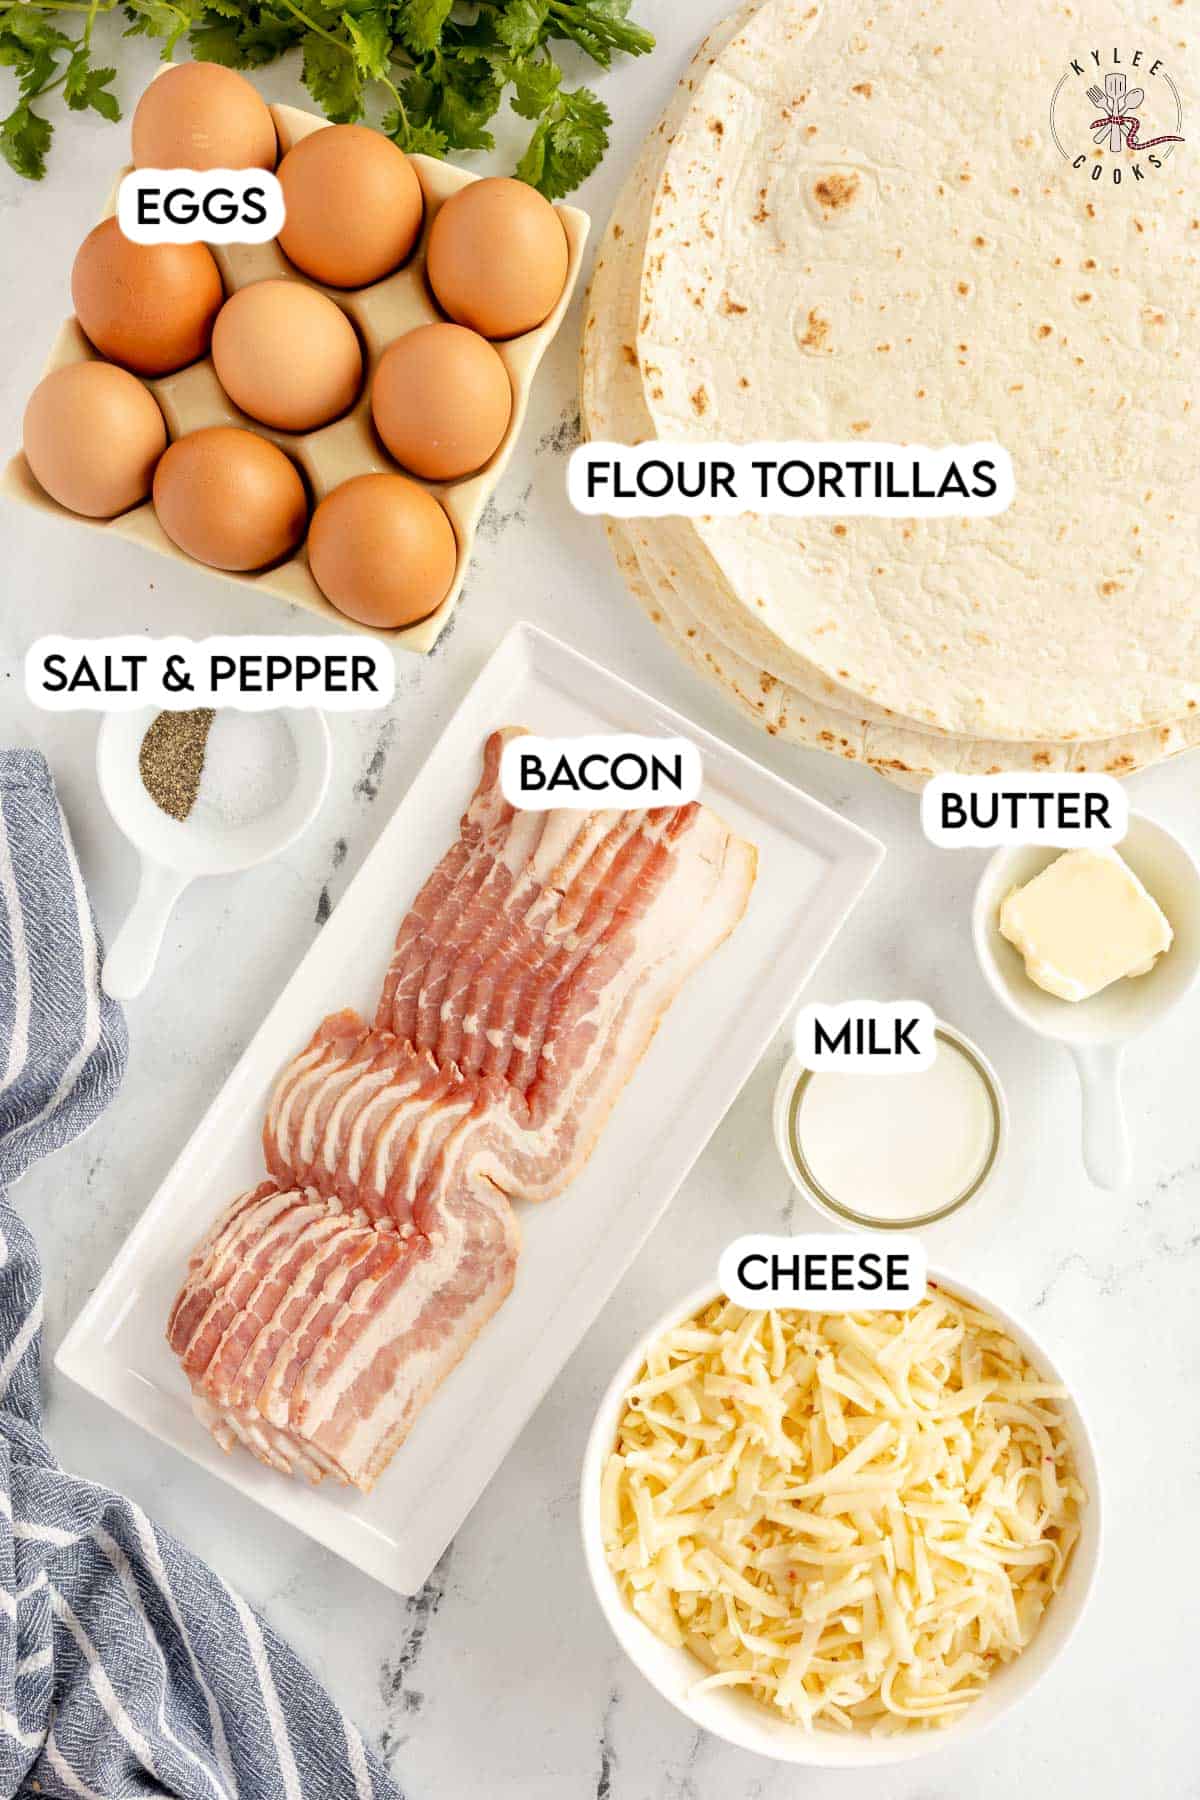 ingredients to make breakfast quesadillas laid out and labeled.